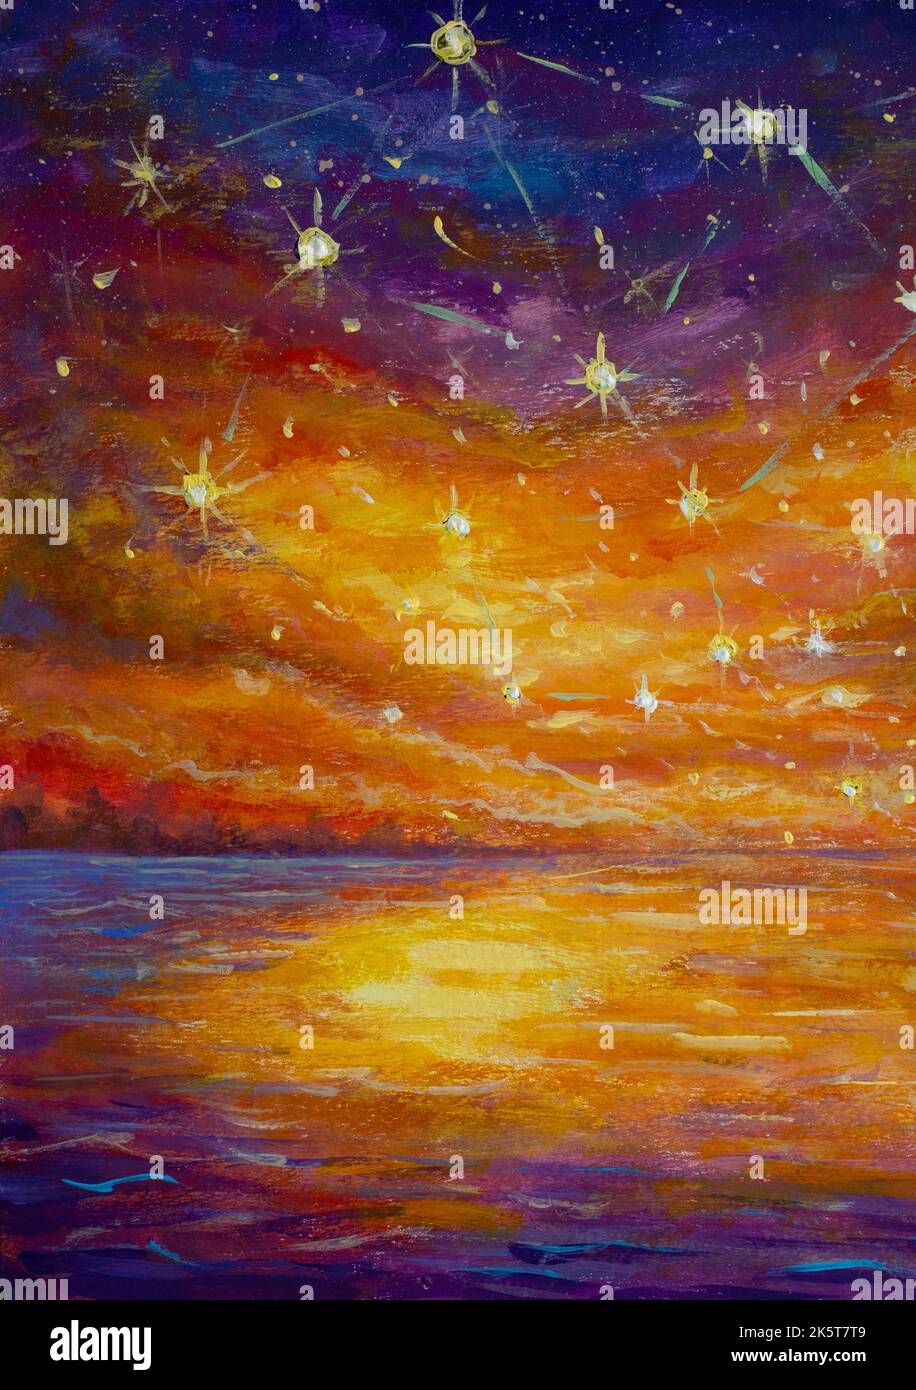 Fairy Sky with Shining Stars at Sunset Oil Painting Impressionism for Children Book Illustration modern artwork Stock Photo